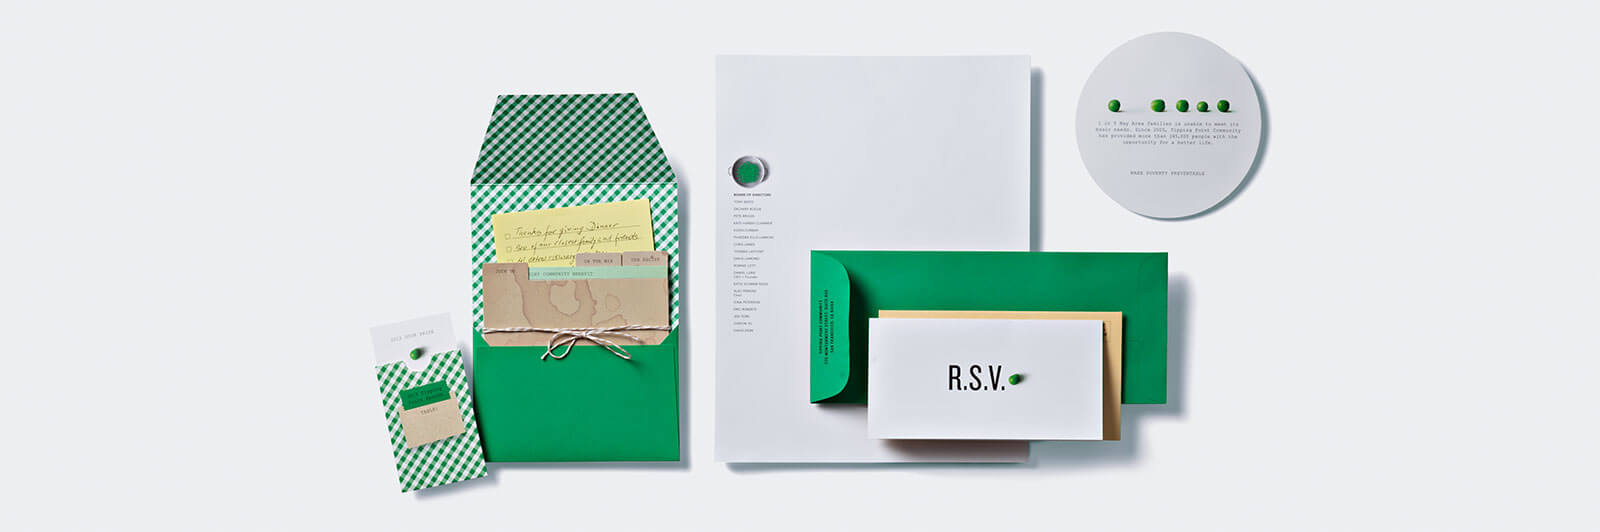 Green and white gingham and peas themed invitation and print collateral